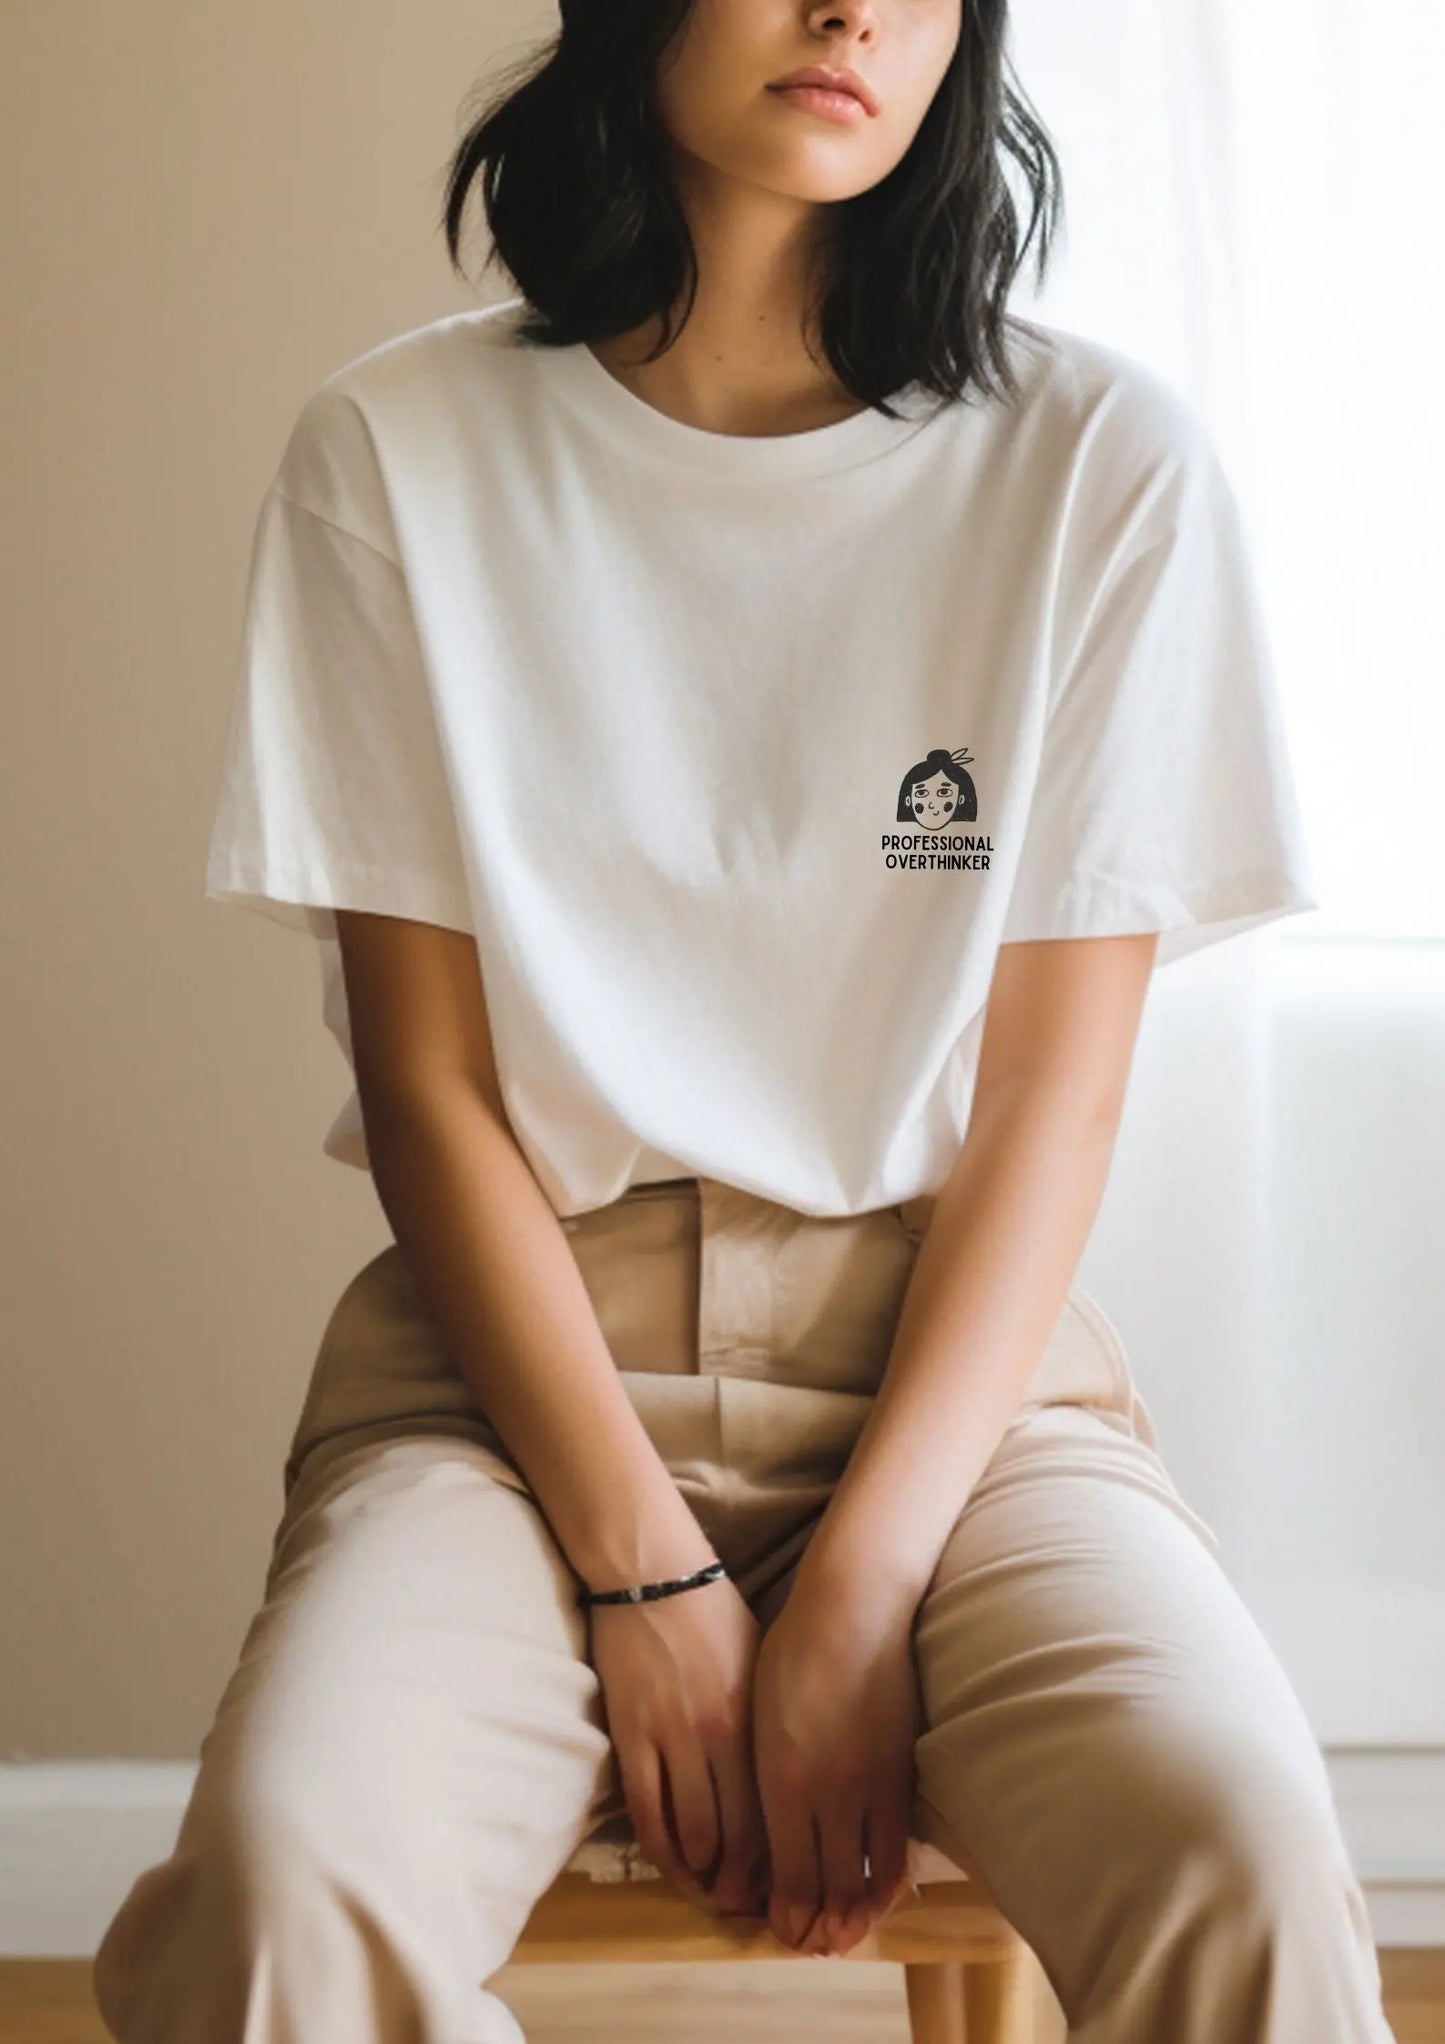 A woman in a white shirt sits in a chair, showcasing an oversized organic cotton T-shirt with Professional Overthinker print. Size chart and washing instructions included.